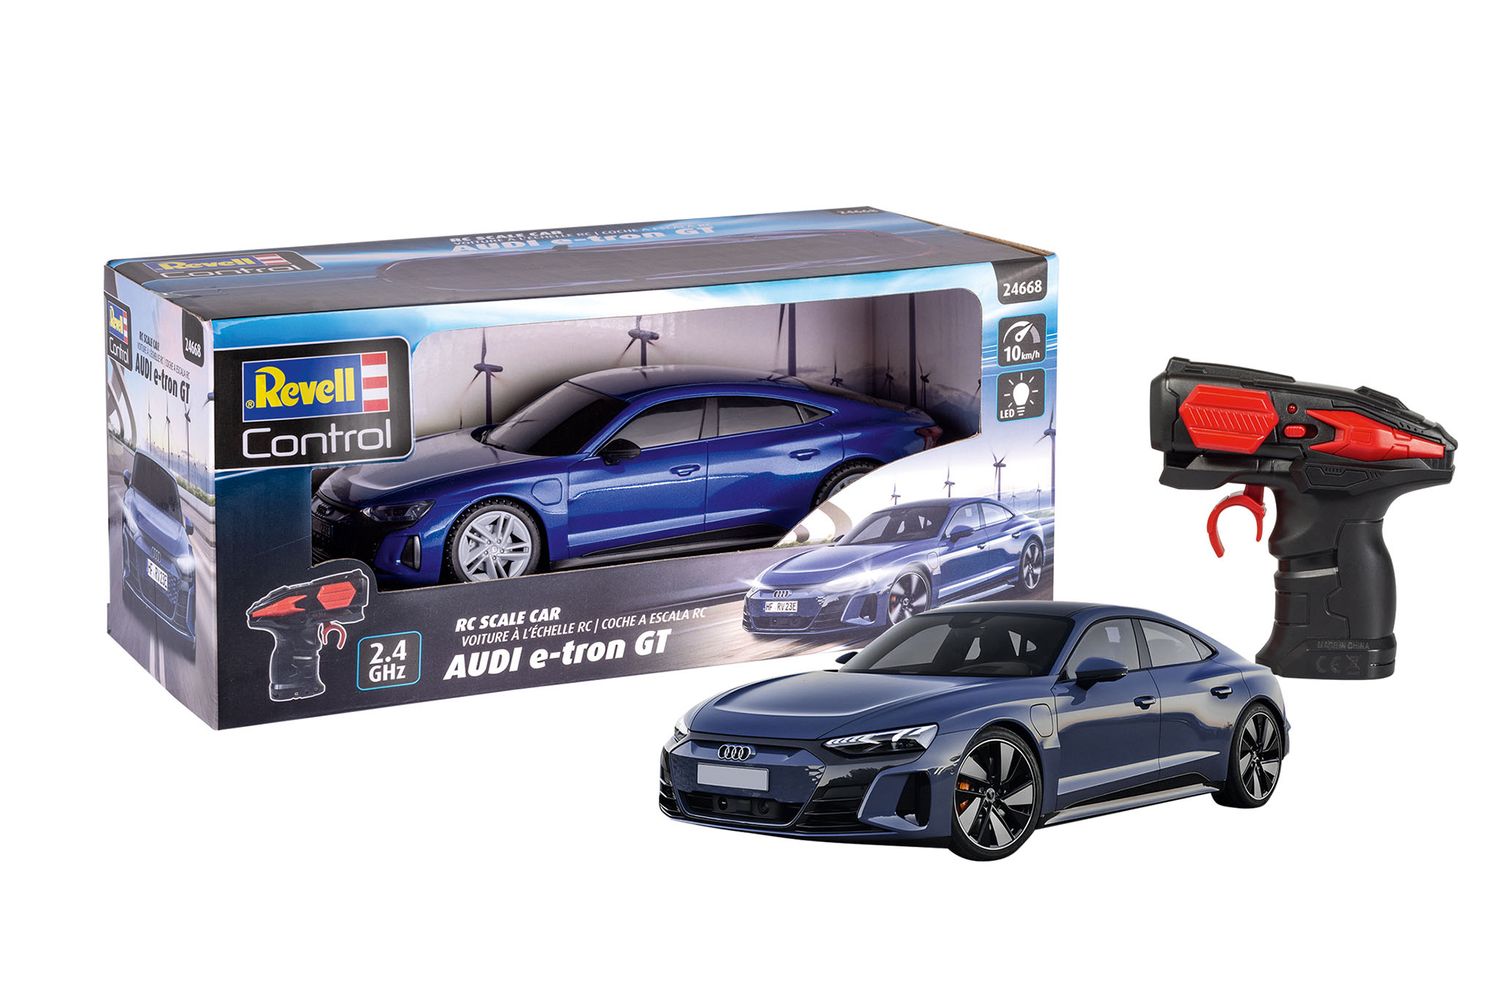 Revell Rc Cars Outlet | www.moveco.com.gt